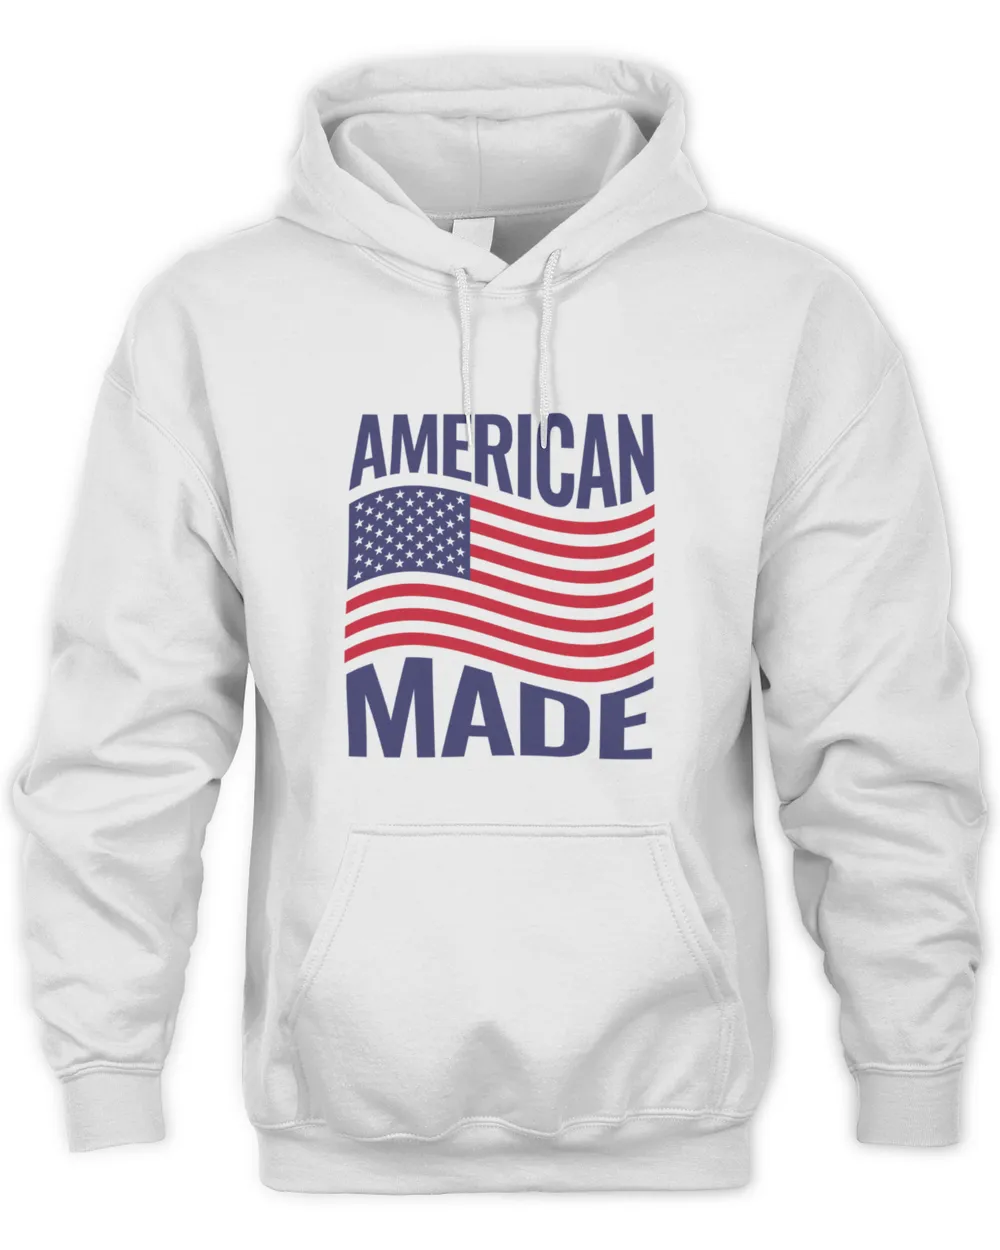 Made in the United States Tshirt   American Tshirt  United State Of America404 T-Shirt